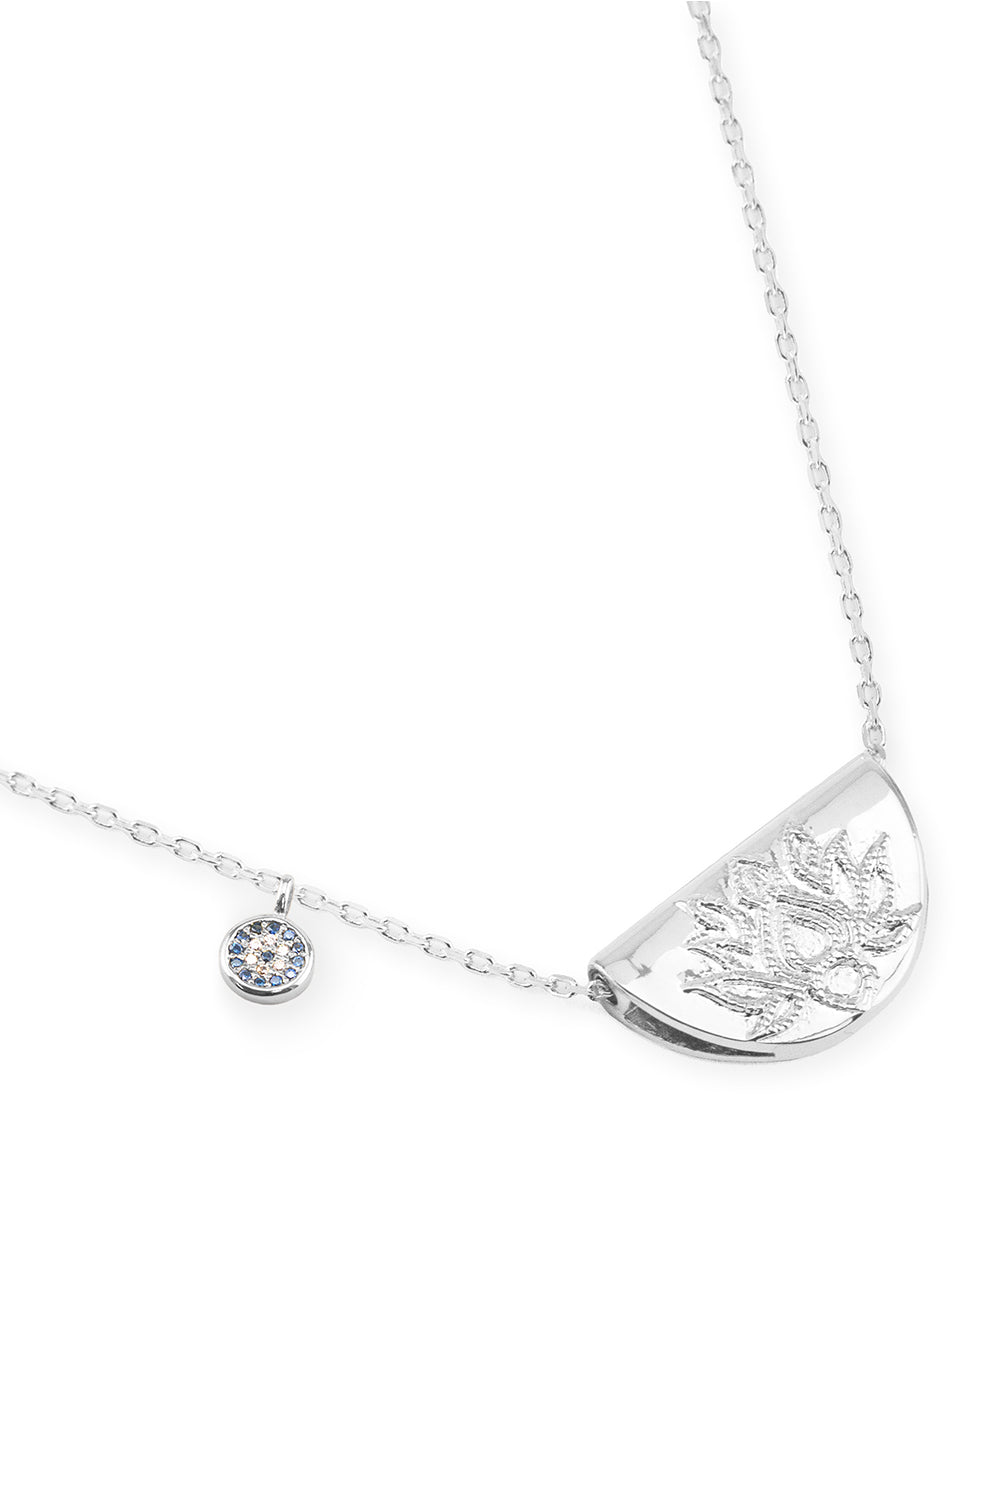 BY CHARLOTTE LOTUS LONG NECKLACE SILVER PLATED